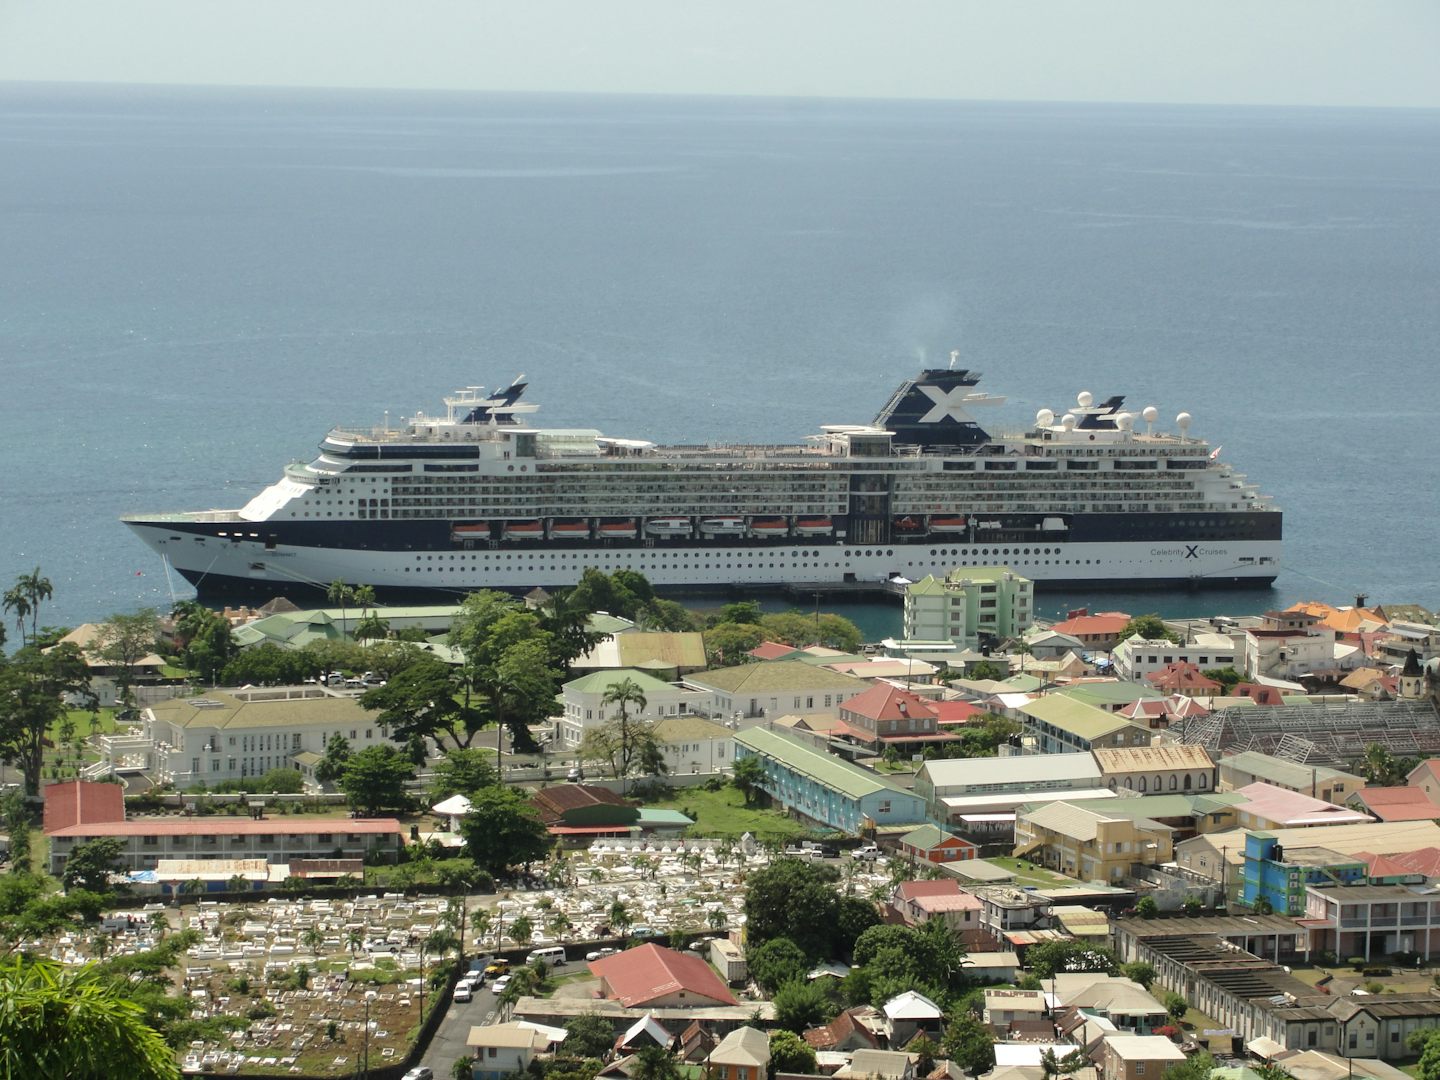 Celebrity Summit docked at Dominica